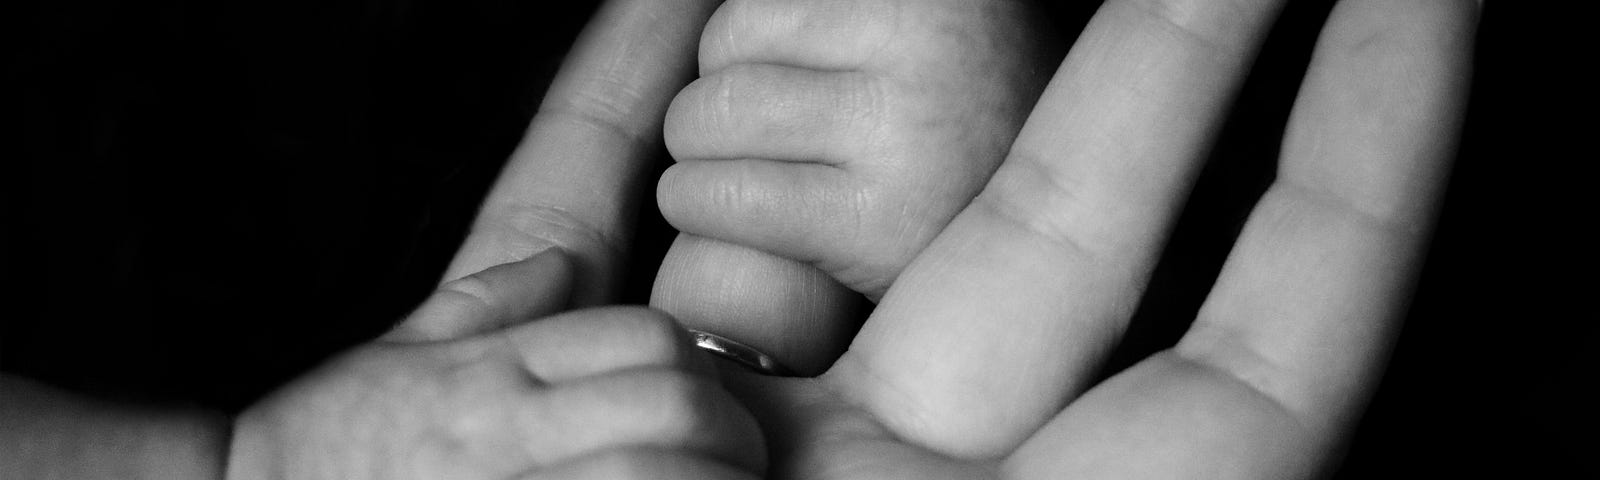 A baby grasping the hands of its father